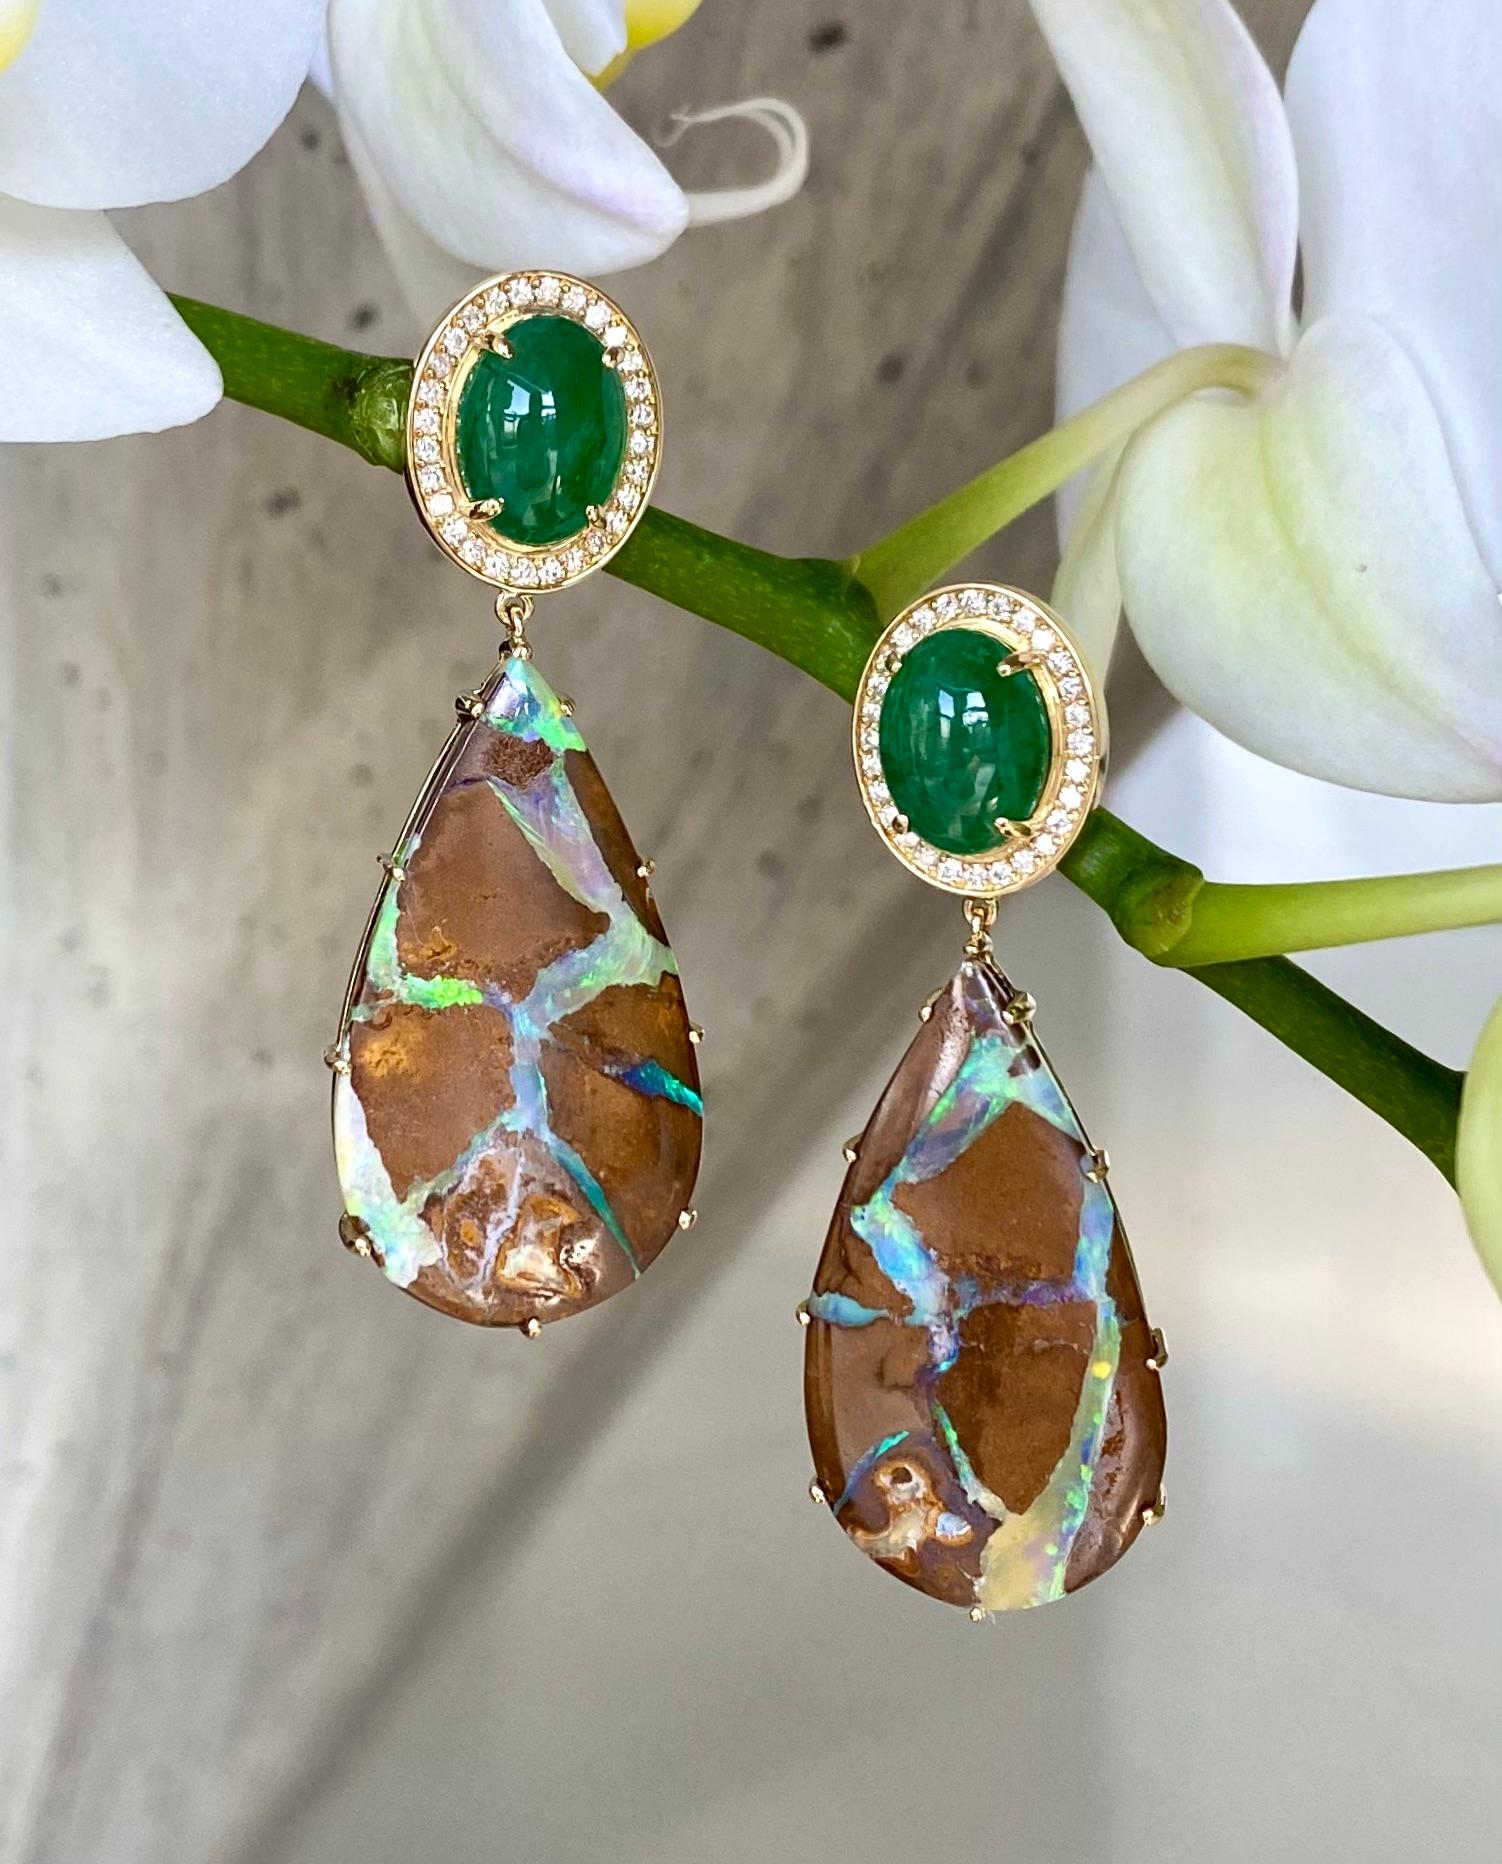 Drop dangle earrings of oval cabochon tsavorites surrounded by diamond pave, with pear shaped boulder opal drops, handcrafted in 18 karat yellow gold.

These one-of-a-kind earrings of gorgeous tsavorites, boulder opals and diamonds reflect the